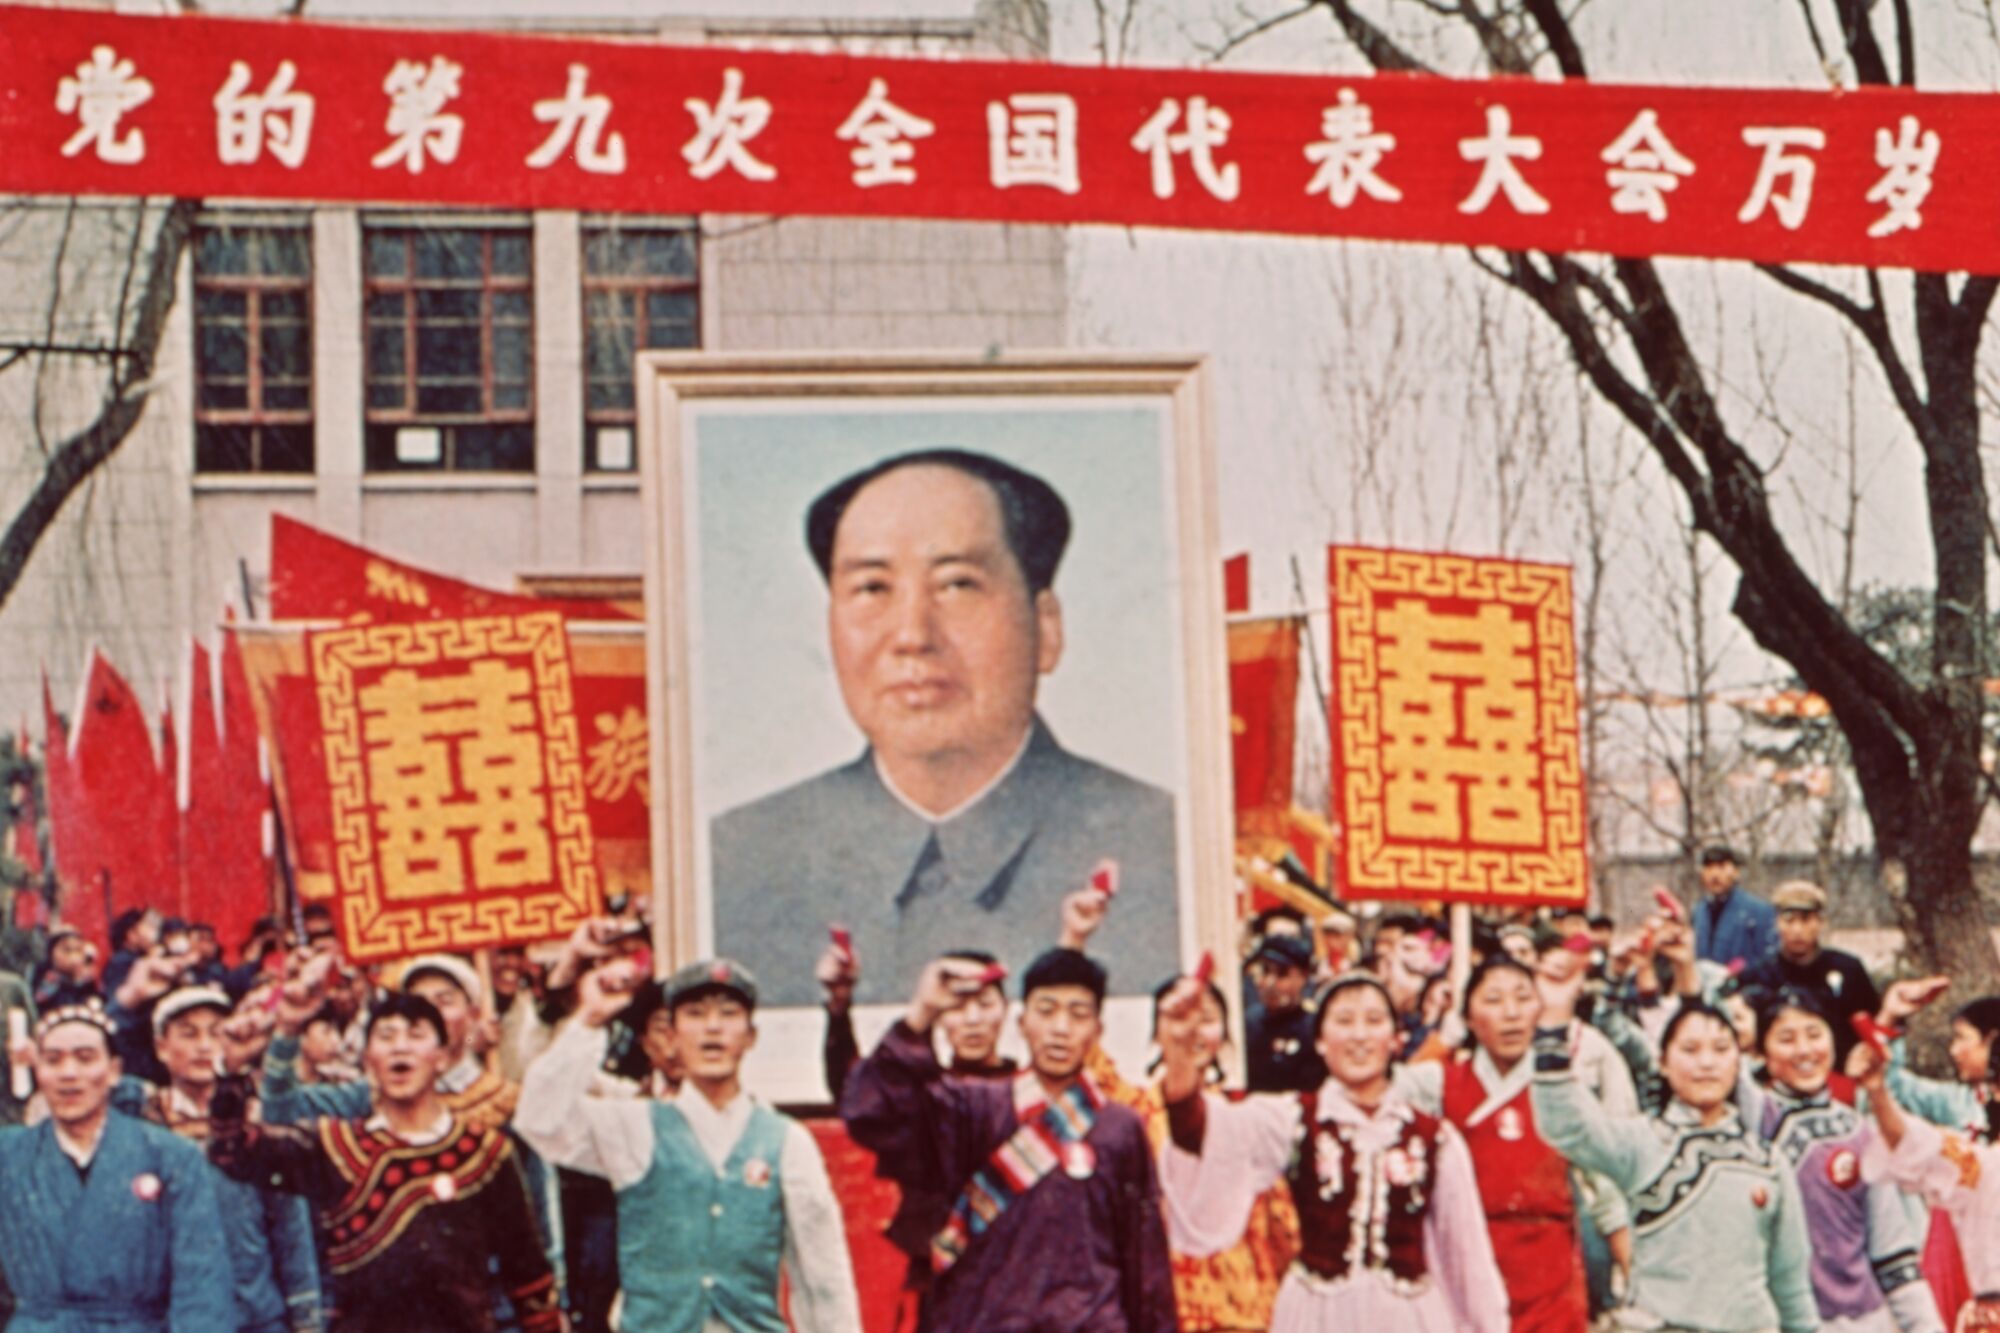 People march  carrying a large poster of Chairman Mao Zedong during the Cultural Revolution in China in 1968.